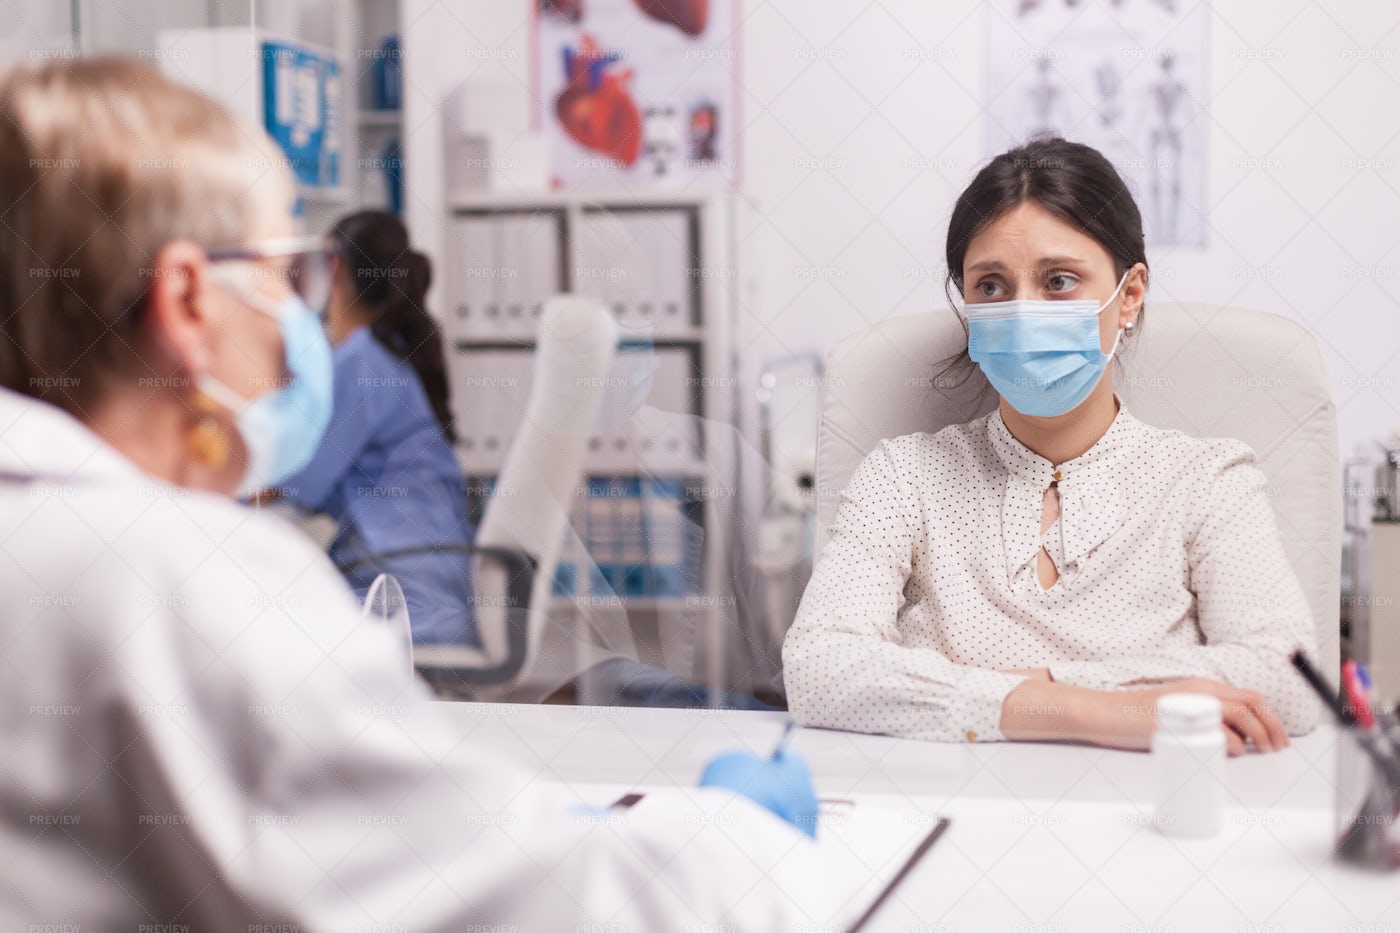 Young Patient With Face Mask: Stock Photos